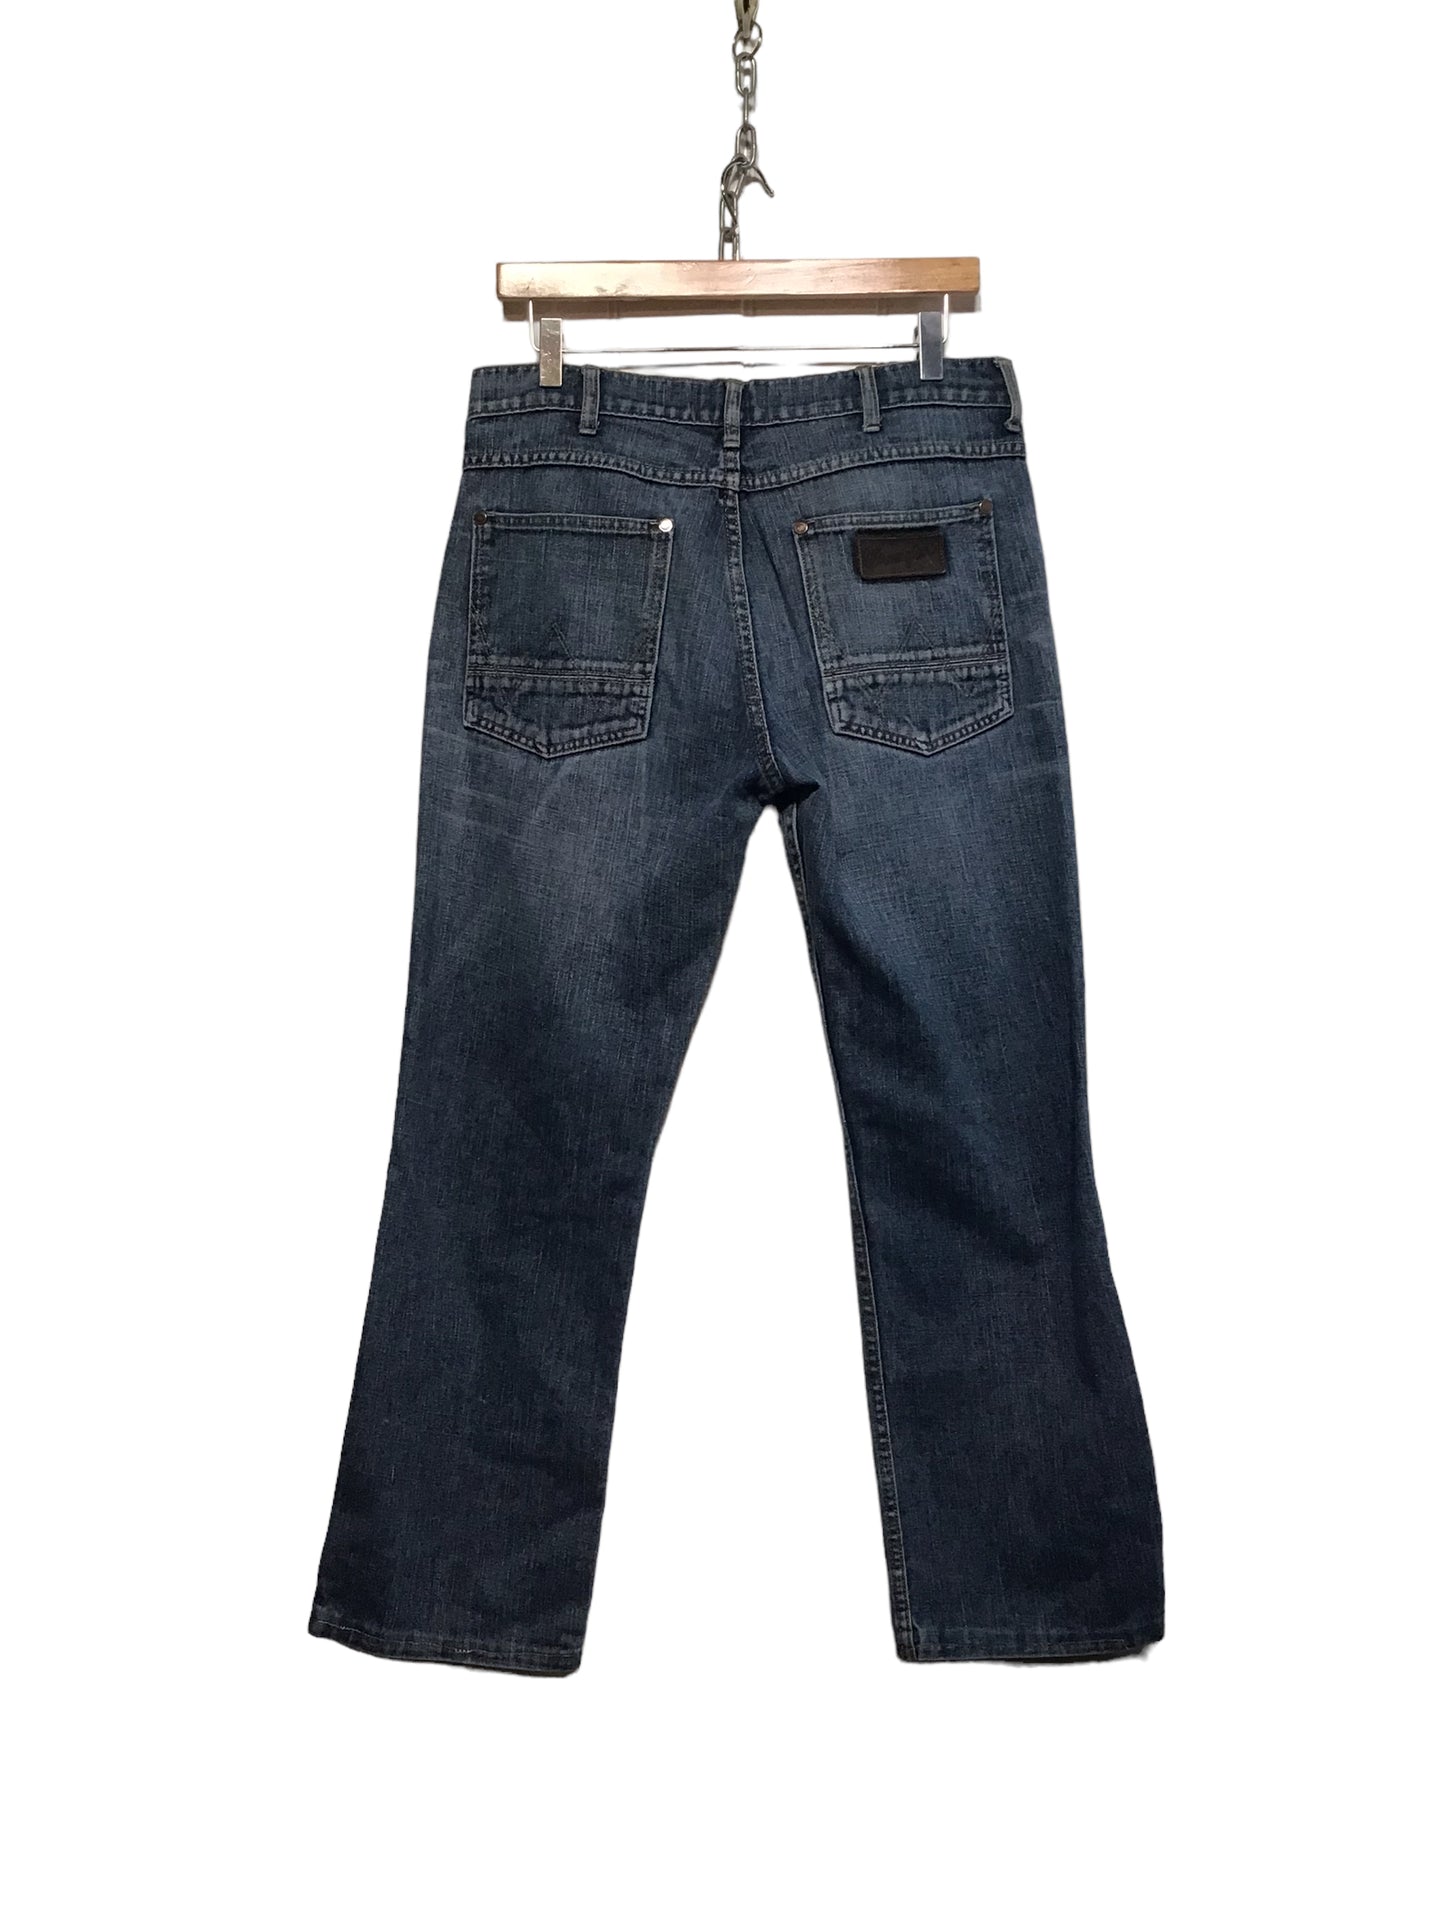 Wrangler Ace Mid Wash Jeans (34x28)